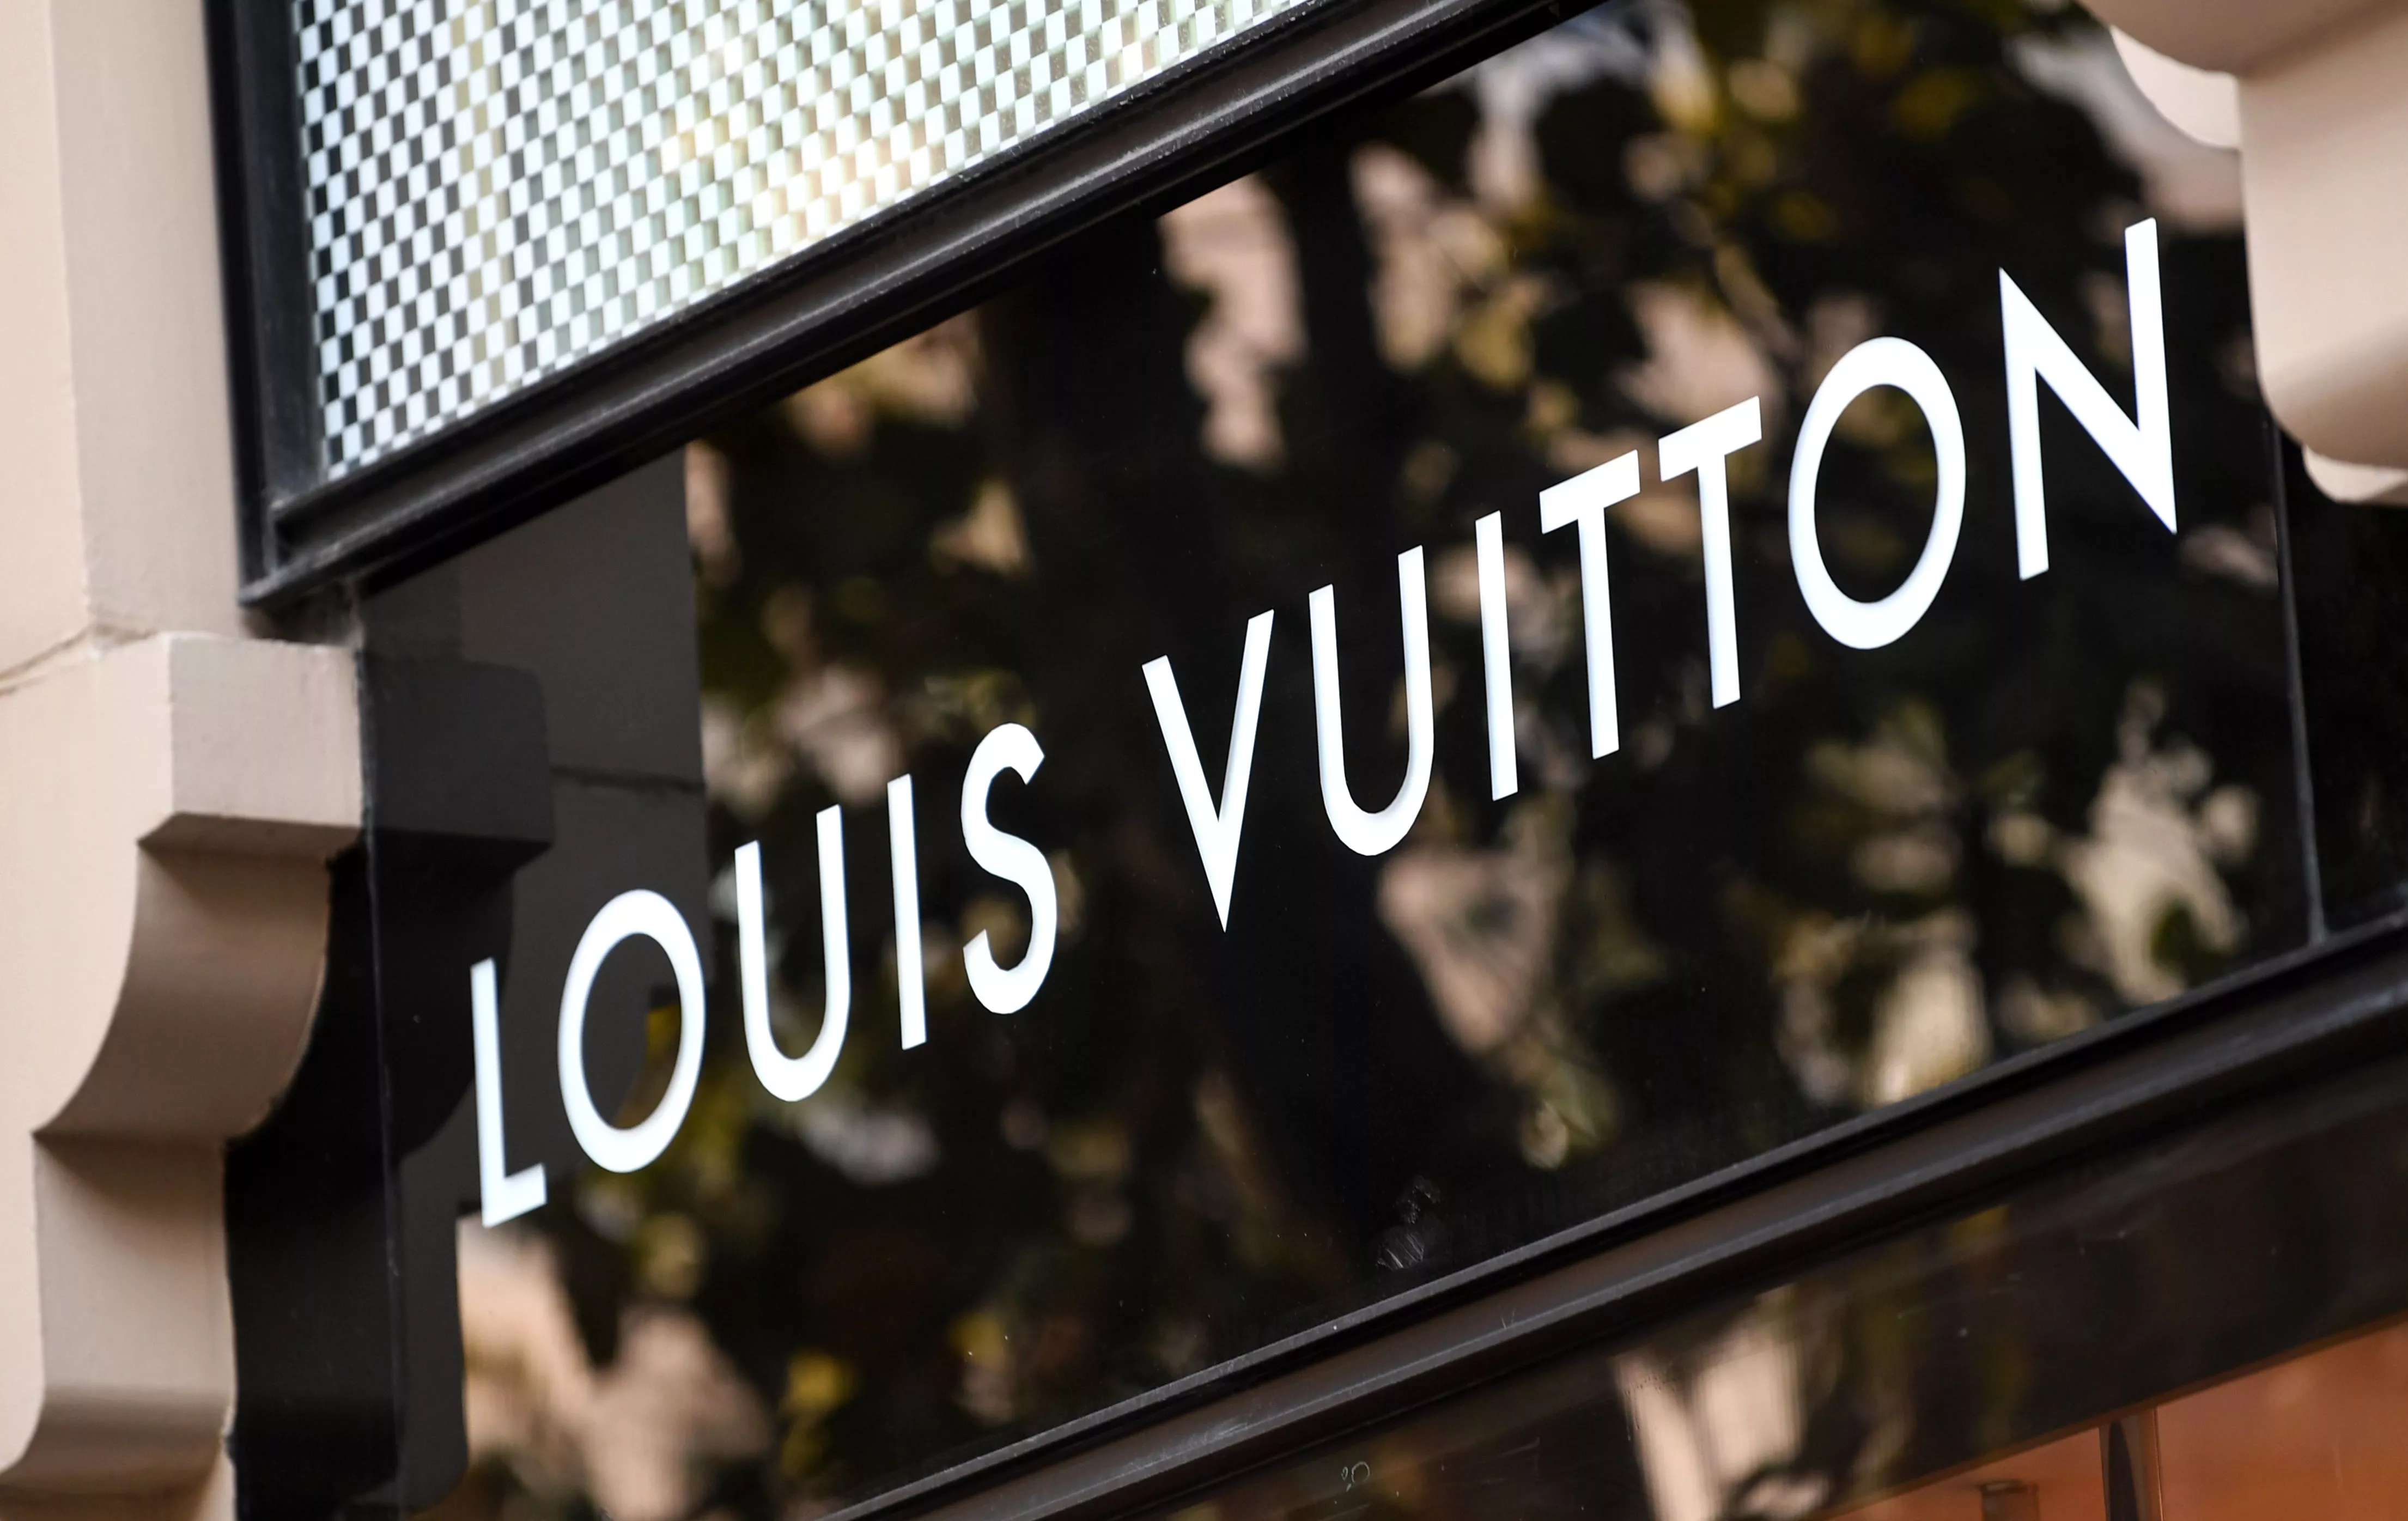 Louis Vuitton Istanbul Nisantasi in Turkey, central_asia | Handbags,Accessories,Travel Bags - Country Helper